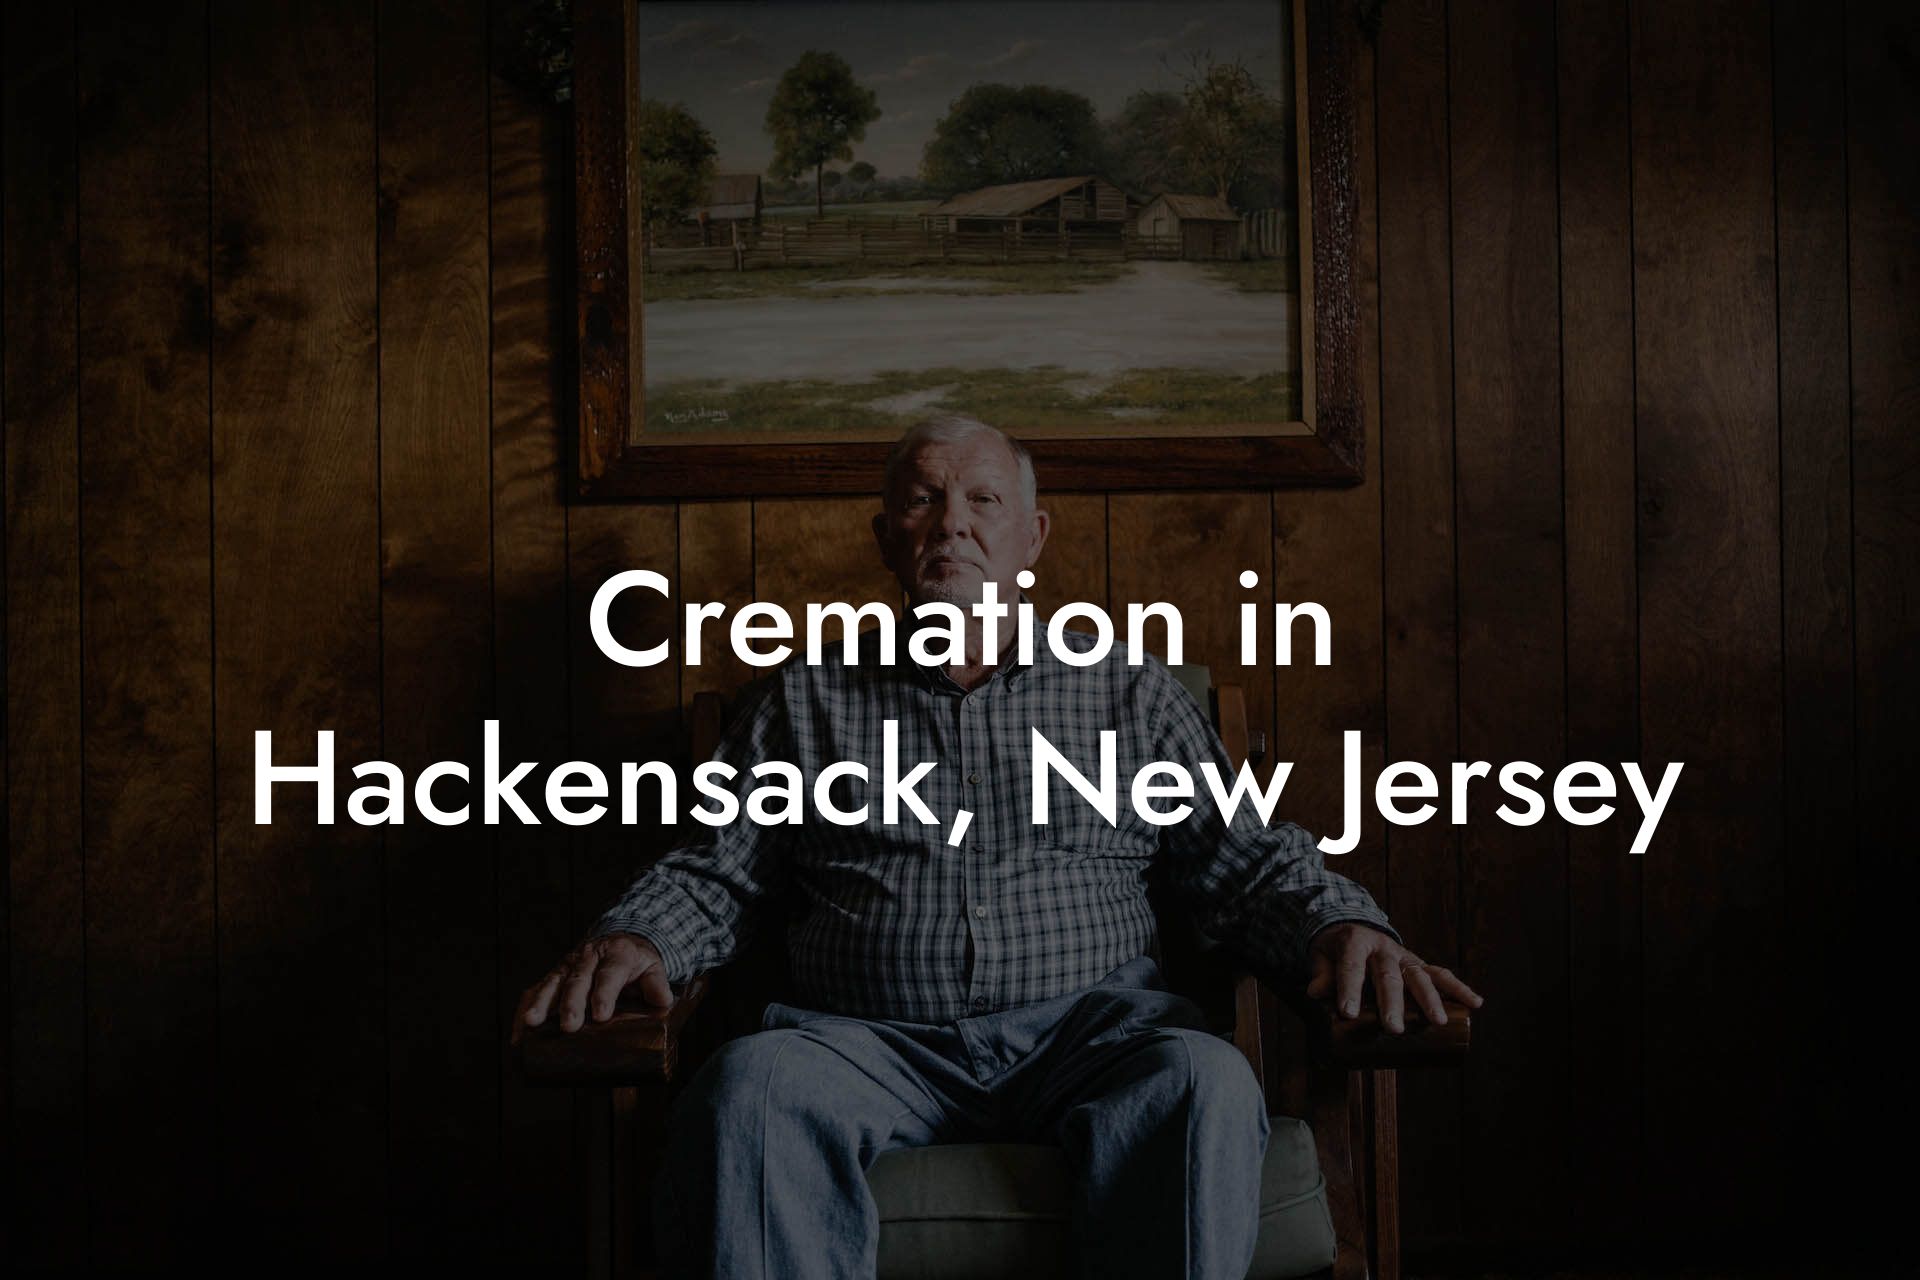 Cremation in Hackensack, New Jersey